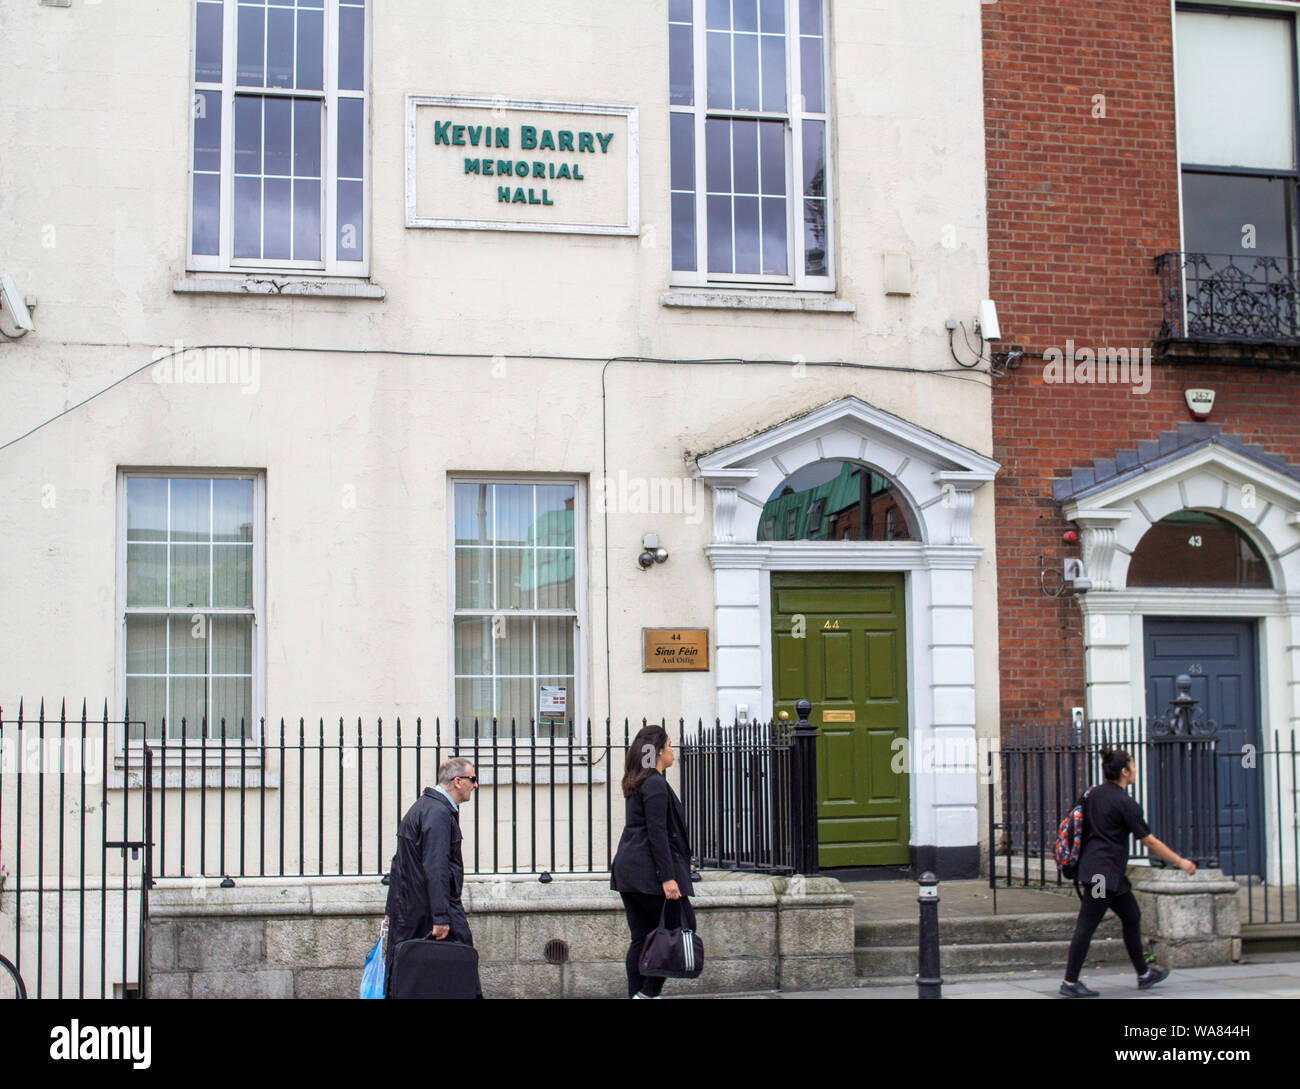 The offices of Sinn fein, the Irish political party in Kevin Barry House,Parnell Square, Dublin., Ireland. Stock Photo